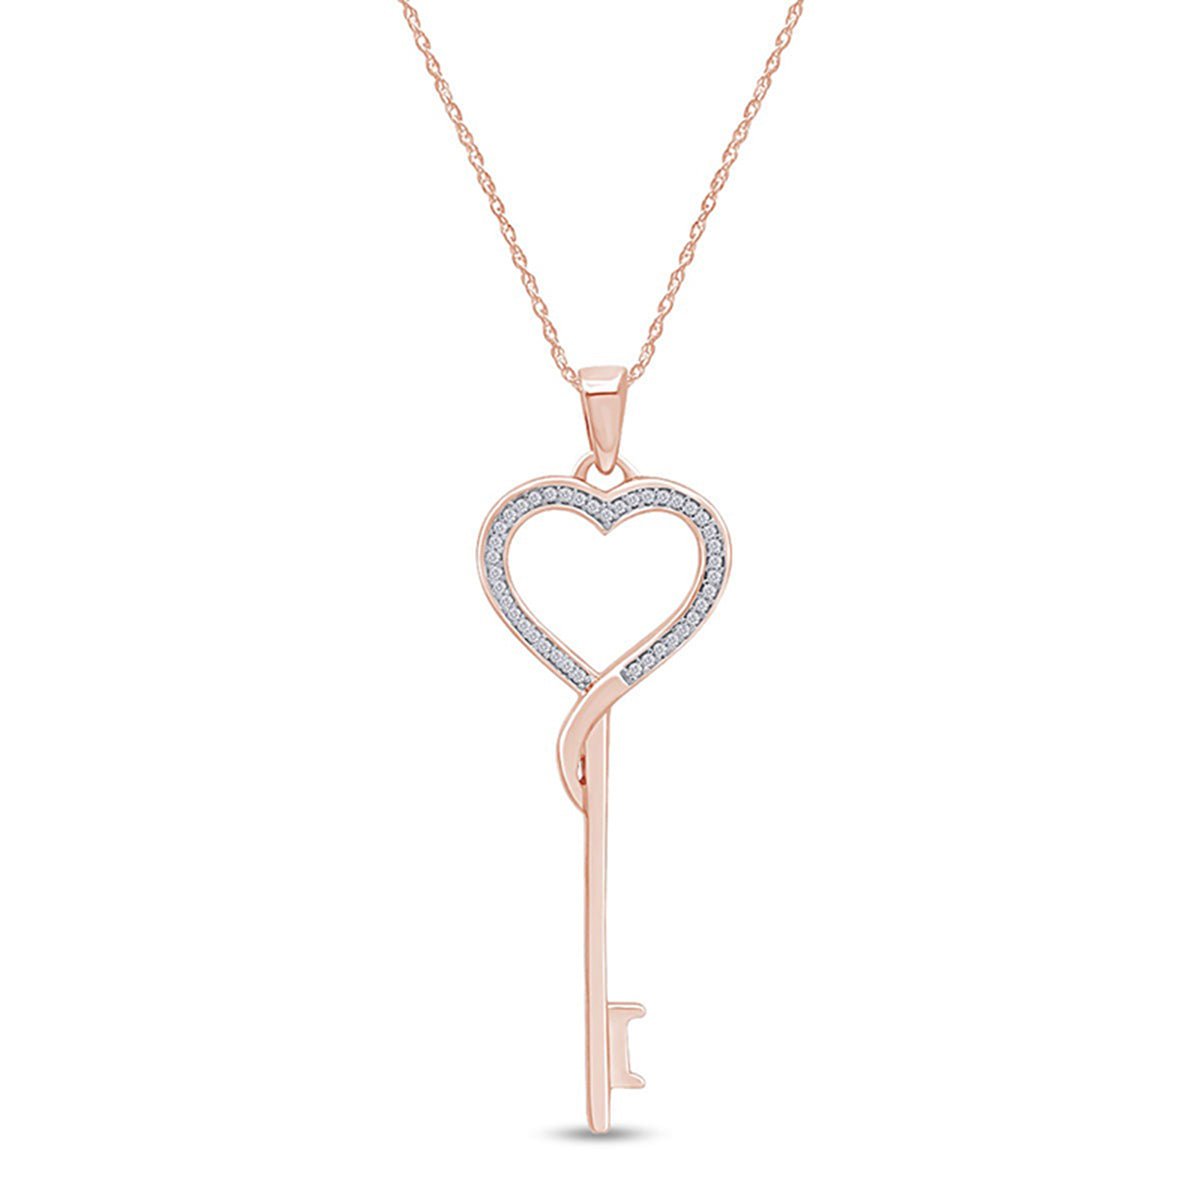 0.10 Carat Natural Diamond Heart Key Pendant Necklace For Women In 925 Sterling Silver